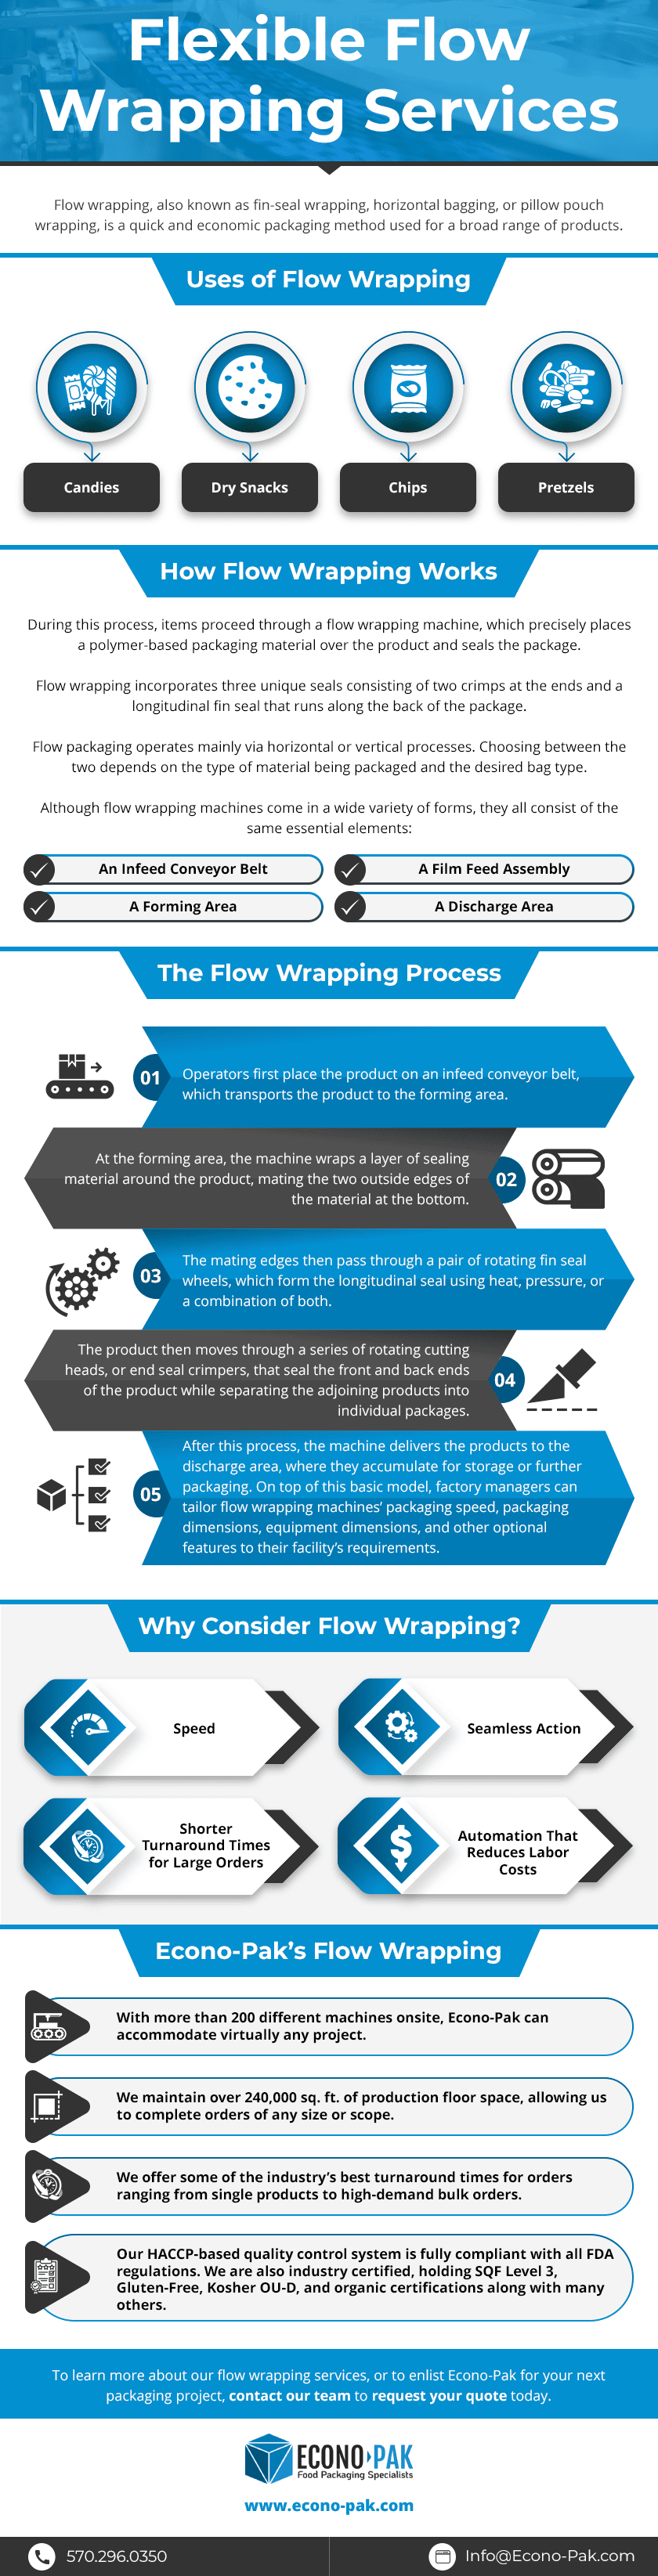 Flexible Flow Wrapping Services